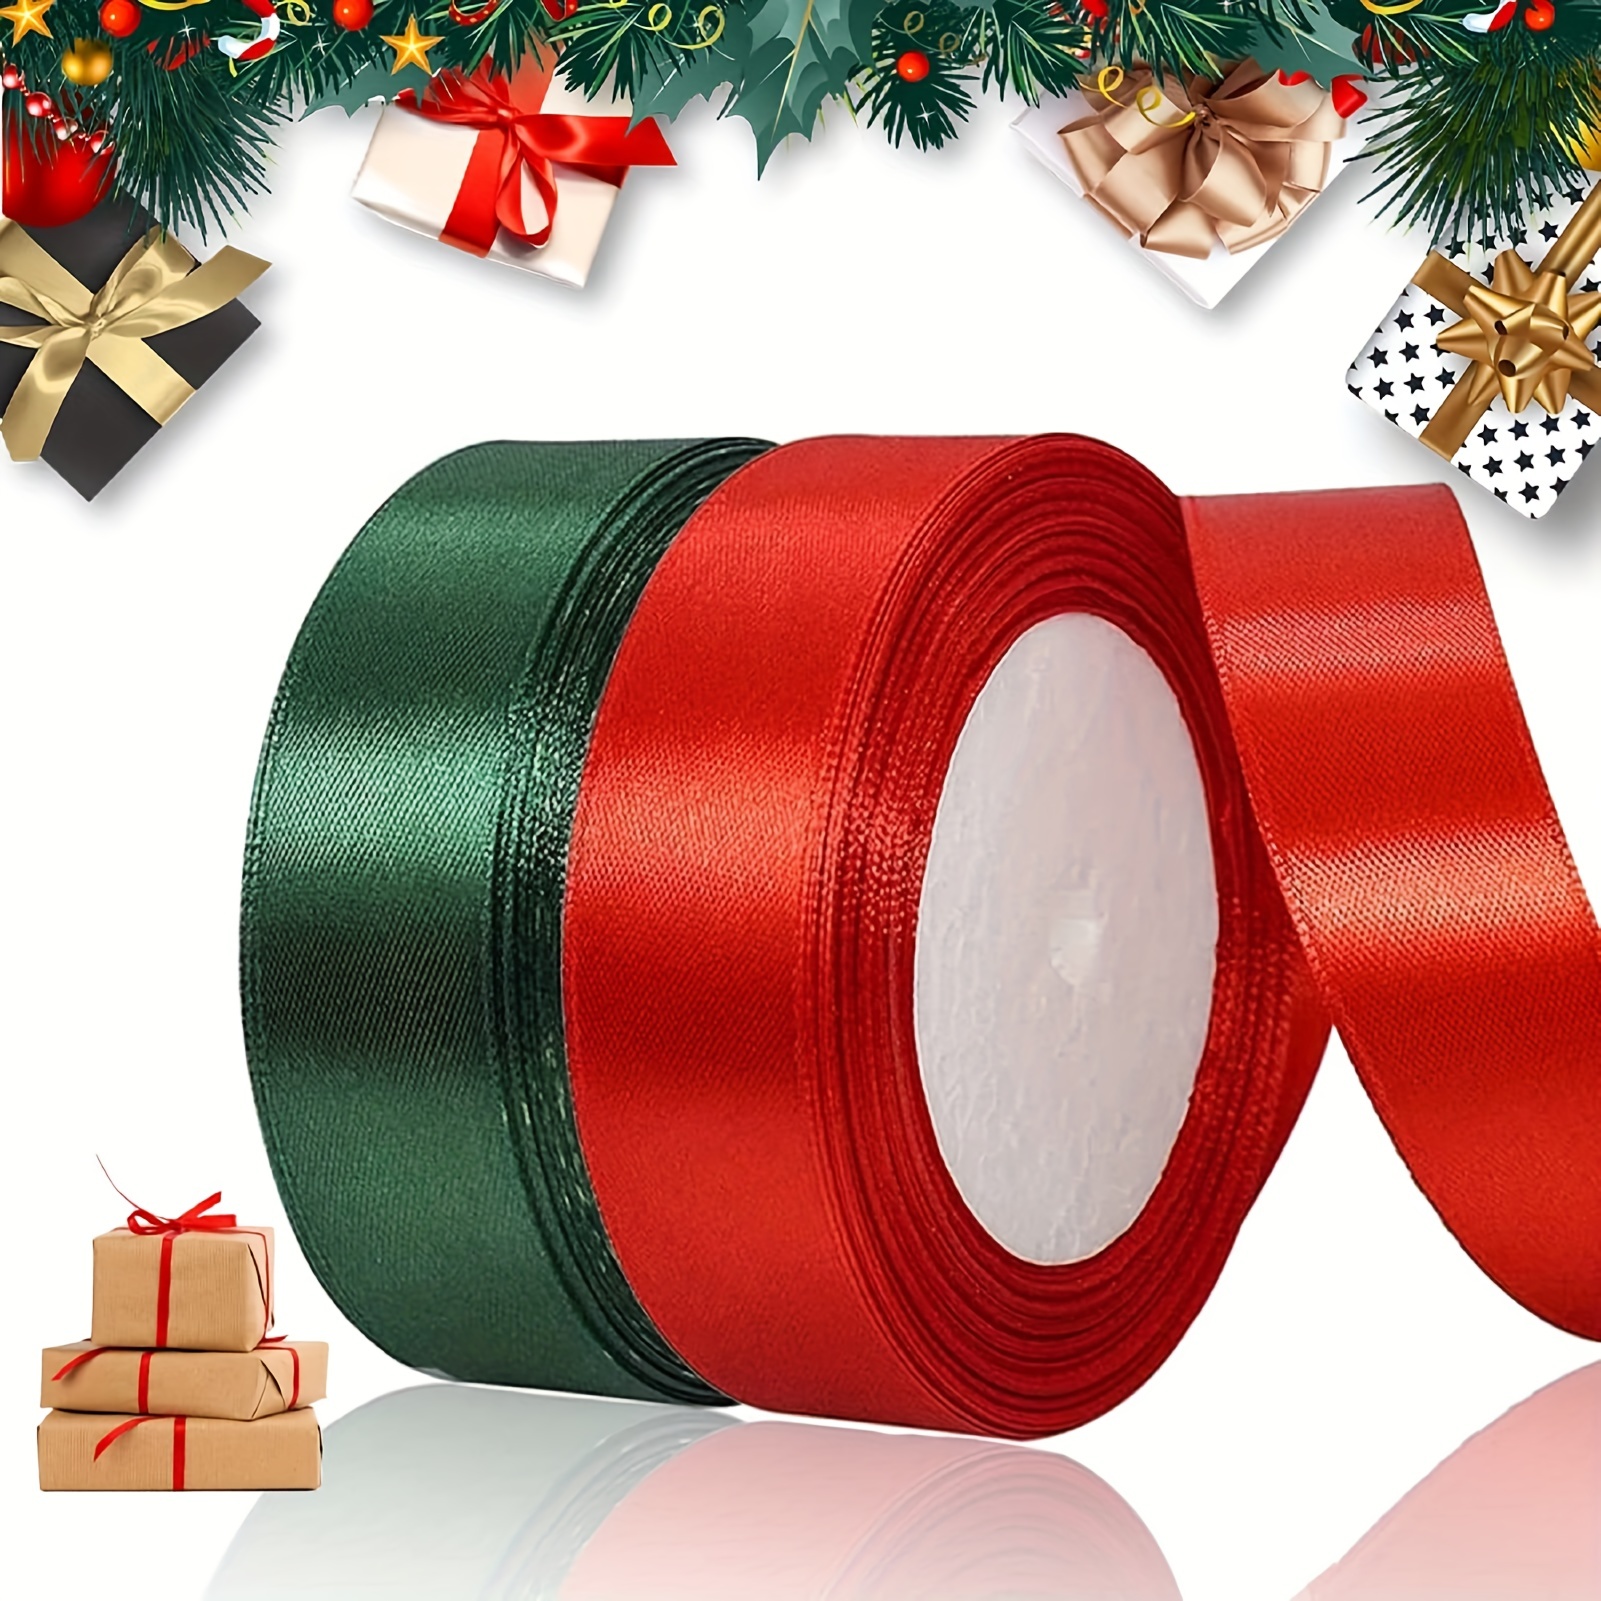 Christmas Ribbon For Gift Wrapping, 2 Rolls Satin Ribbon Red Dark Green For  Crafts, Wide 20mm Ribbons For Making Christmas Tree Cake Wreath Wedding De